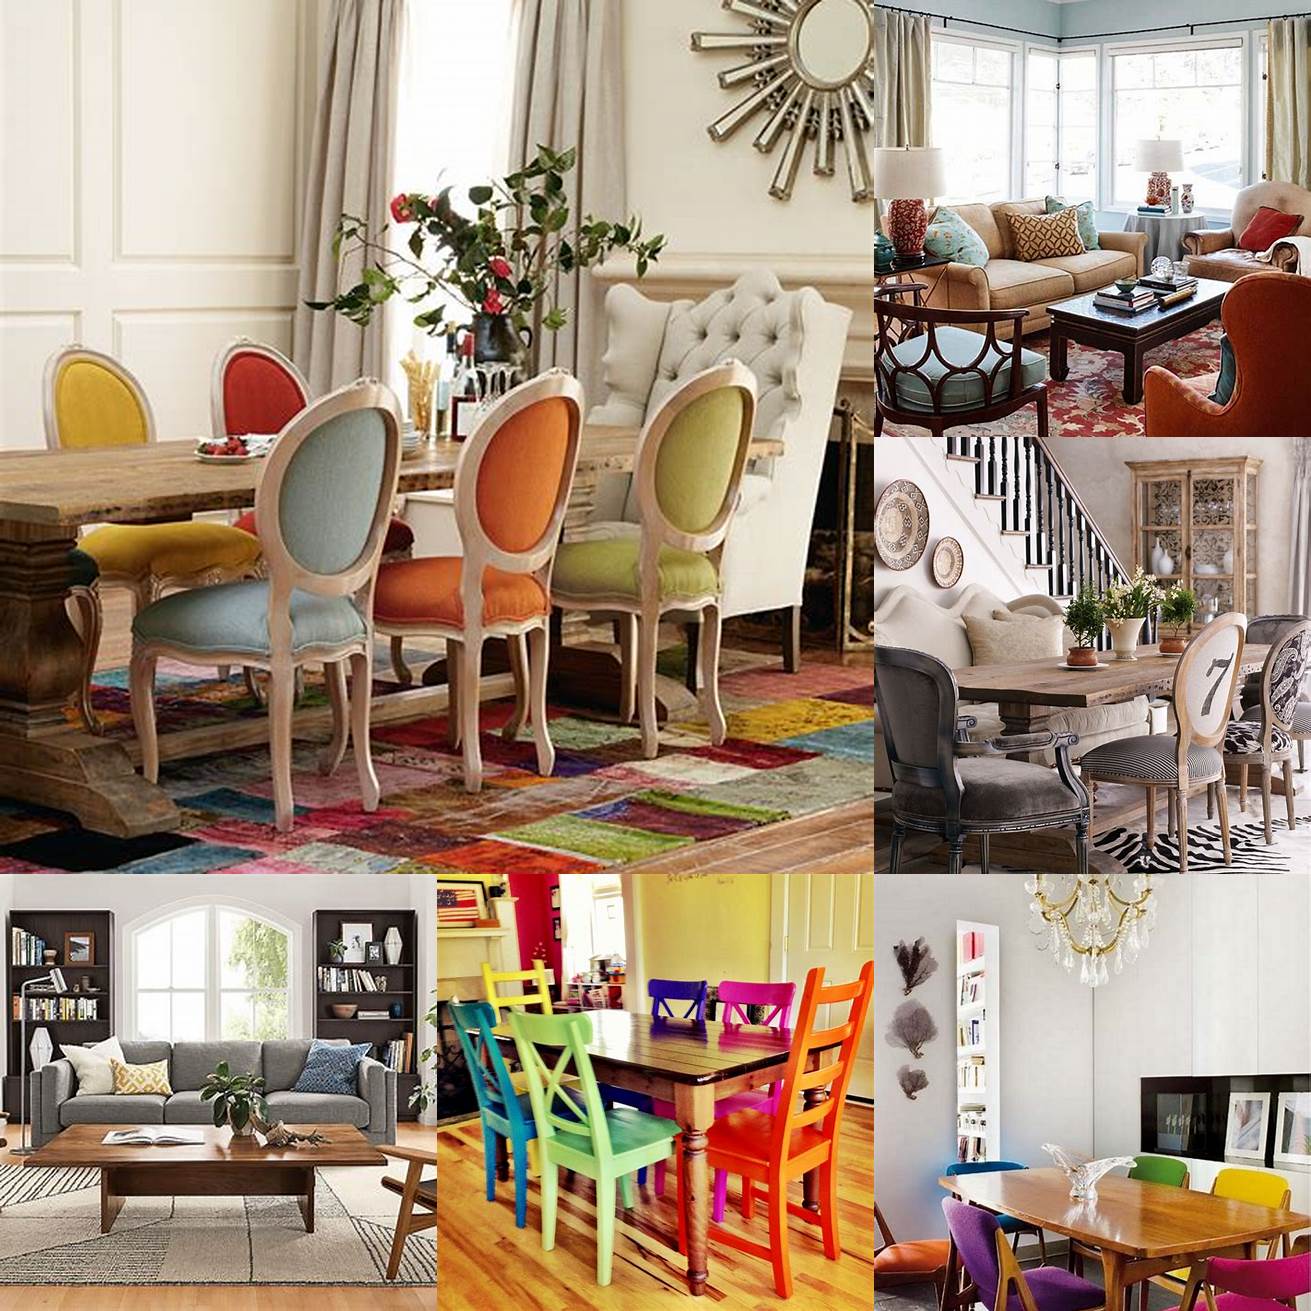 Mix and match different colored chairs